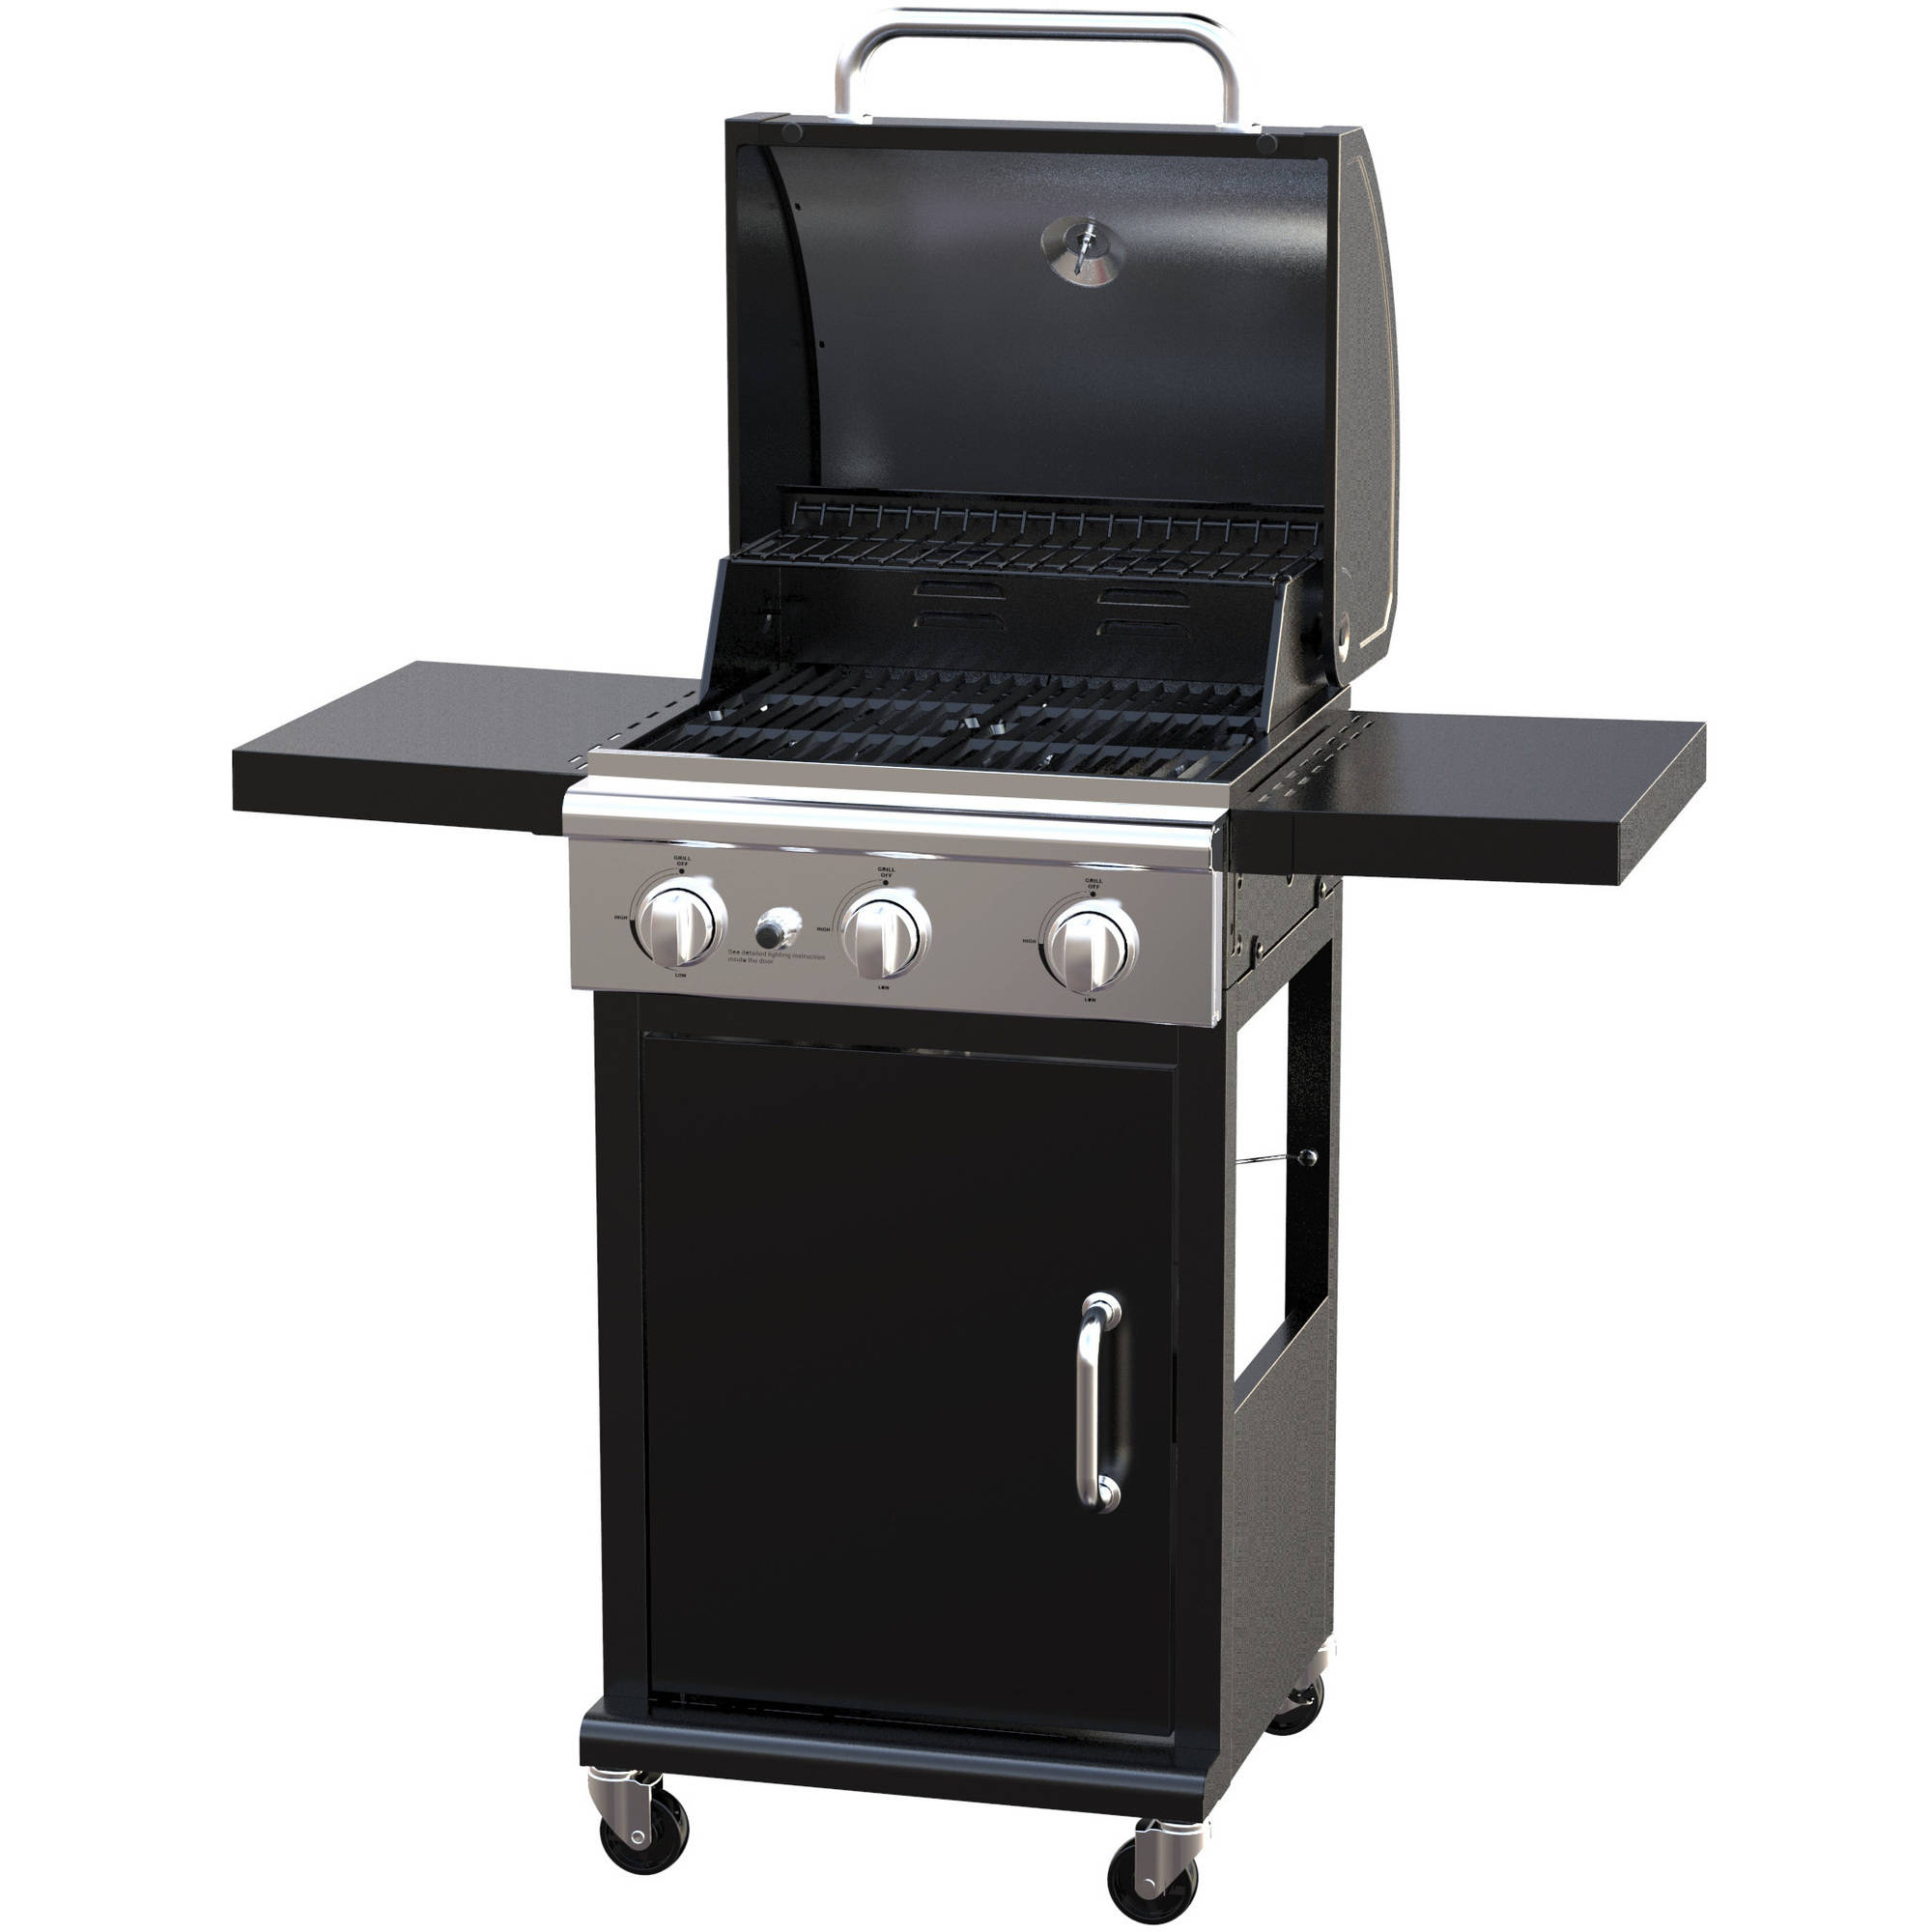 Better Homes and Gardens 3-Burner Gas Grill - image 3 of 7